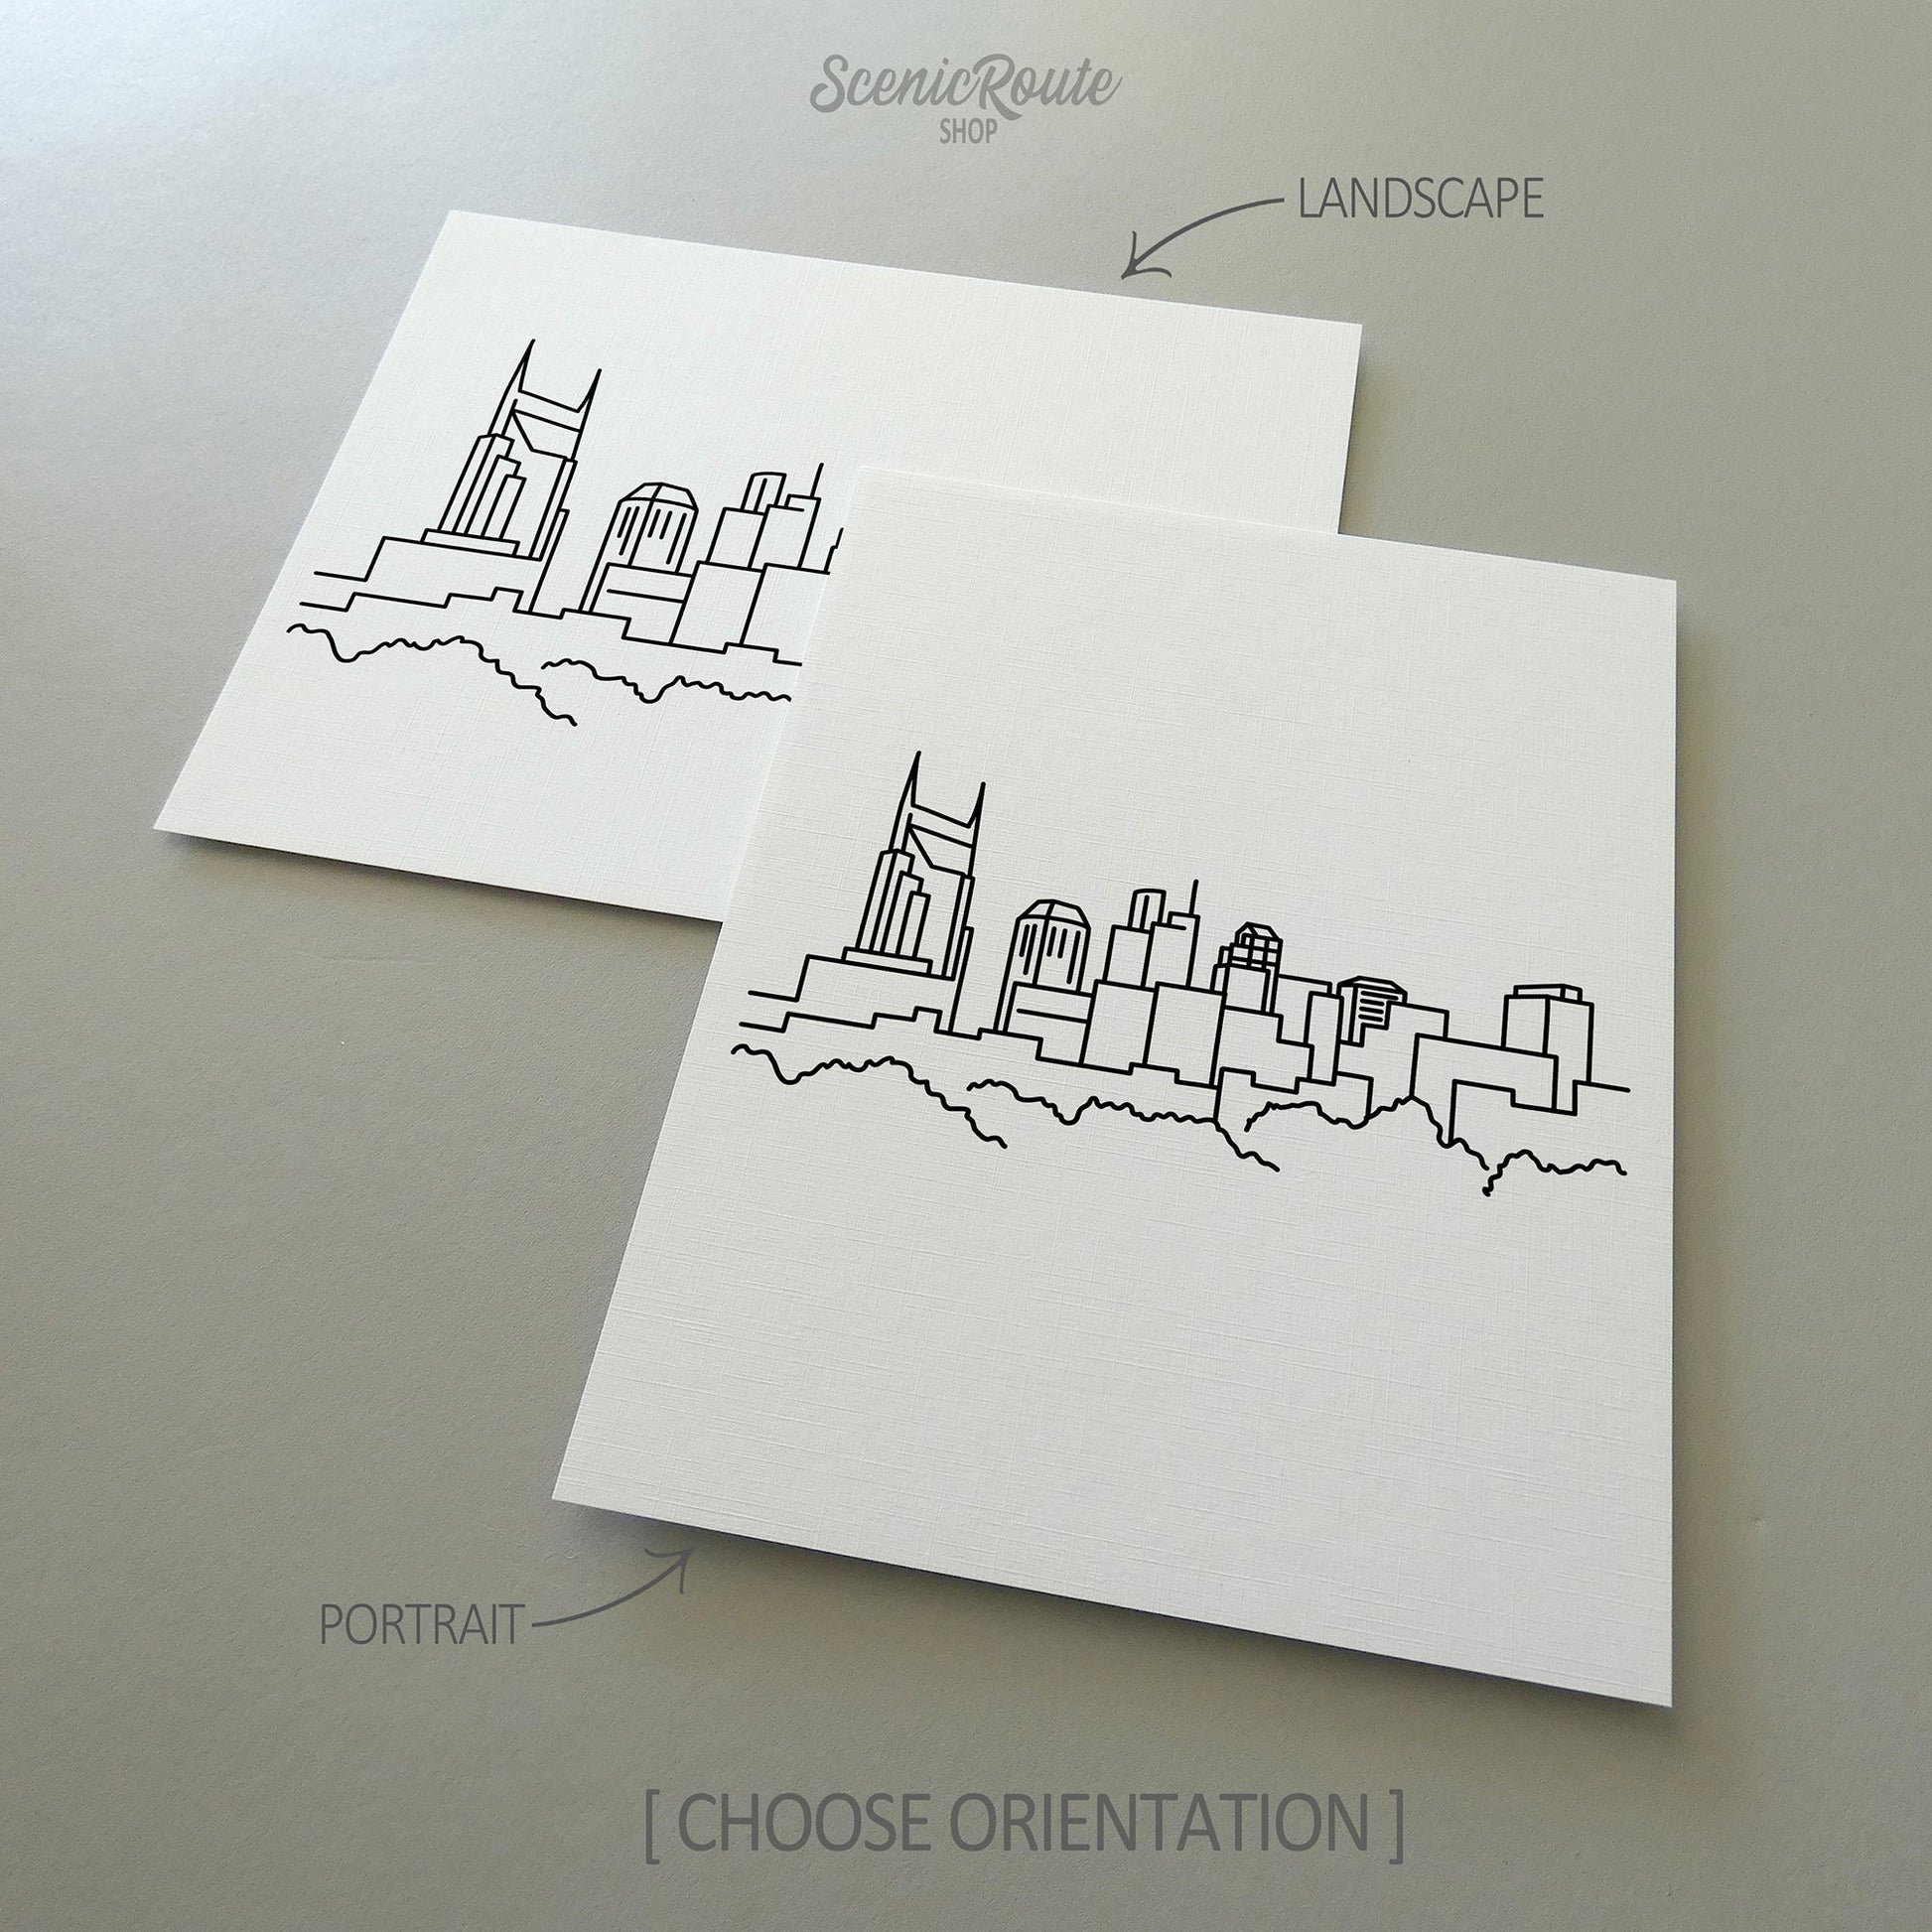 Two line art drawings of the Nashville Skyline on white linen paper with a gray background.  The pieces are shown in portrait and landscape orientation for the available art print options.